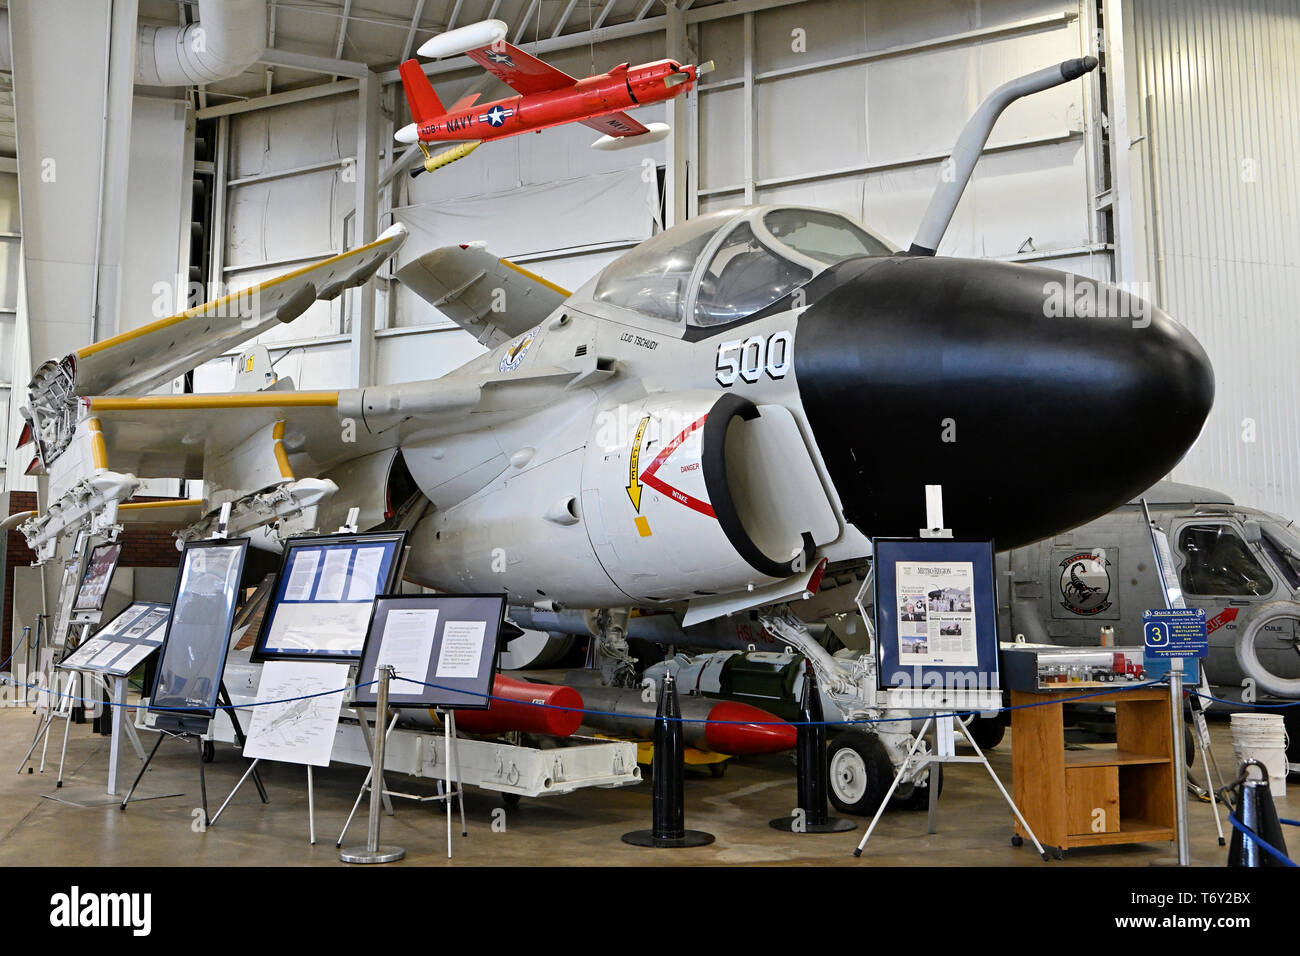 Vietnam era Grumman A-6 Intruder attack aircraft in tribute to Jeremiah Denton on display at the Aircraft Pavillion in Mobile Alabama, USA. Stock Photo